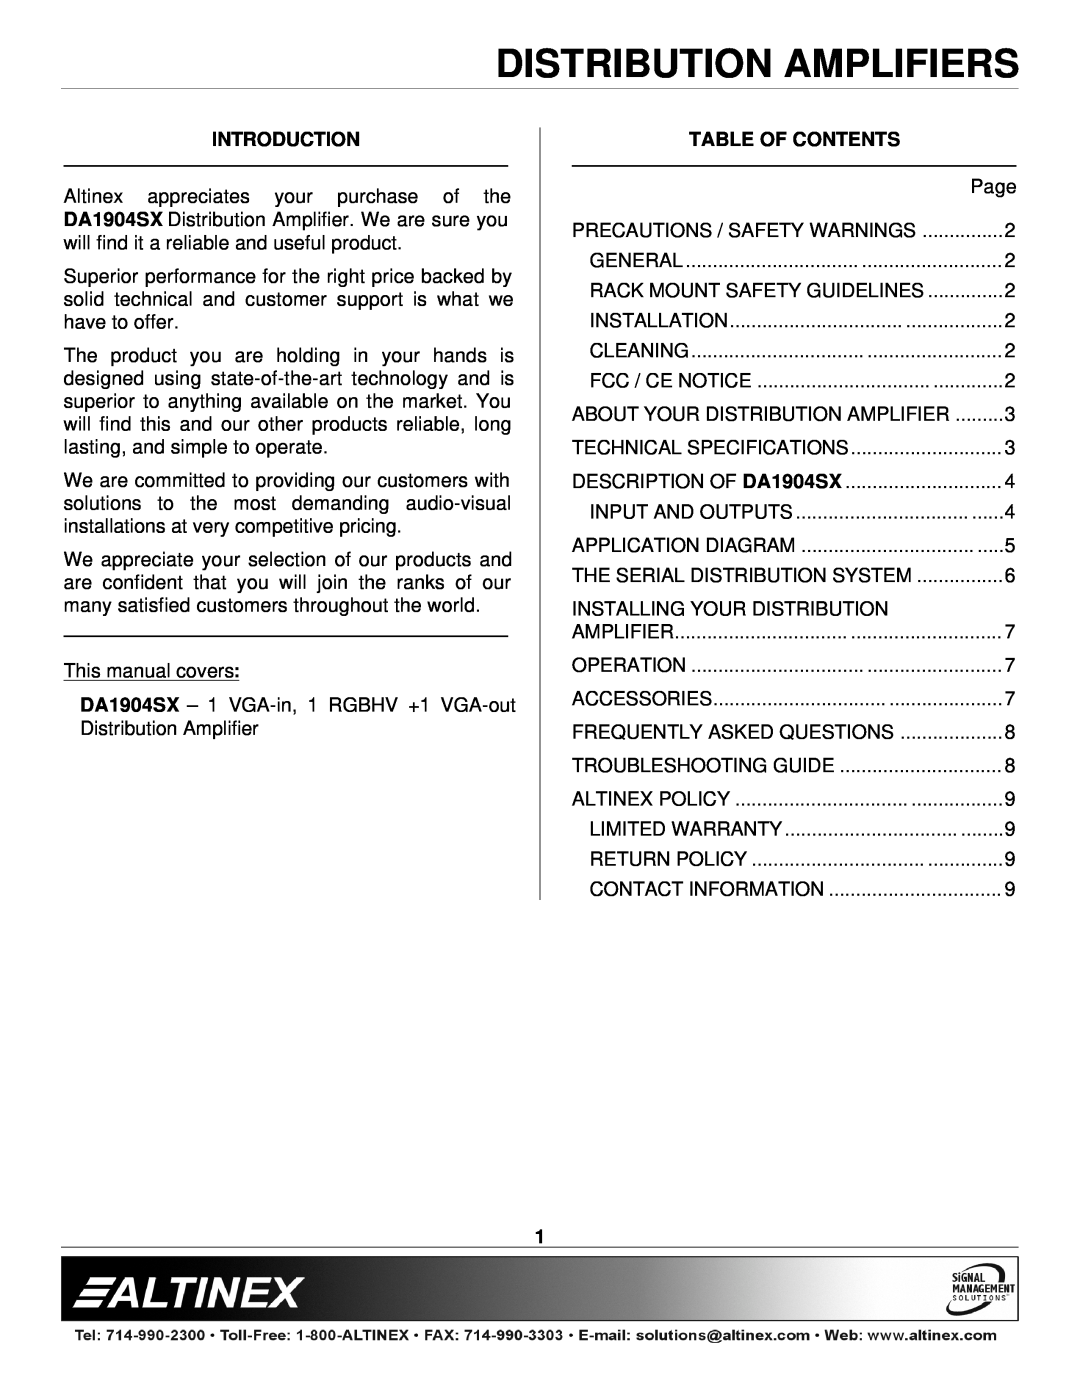 Altinex DA1904SX manual Introduction, Table Of Contents, Distribution Amplifiers 